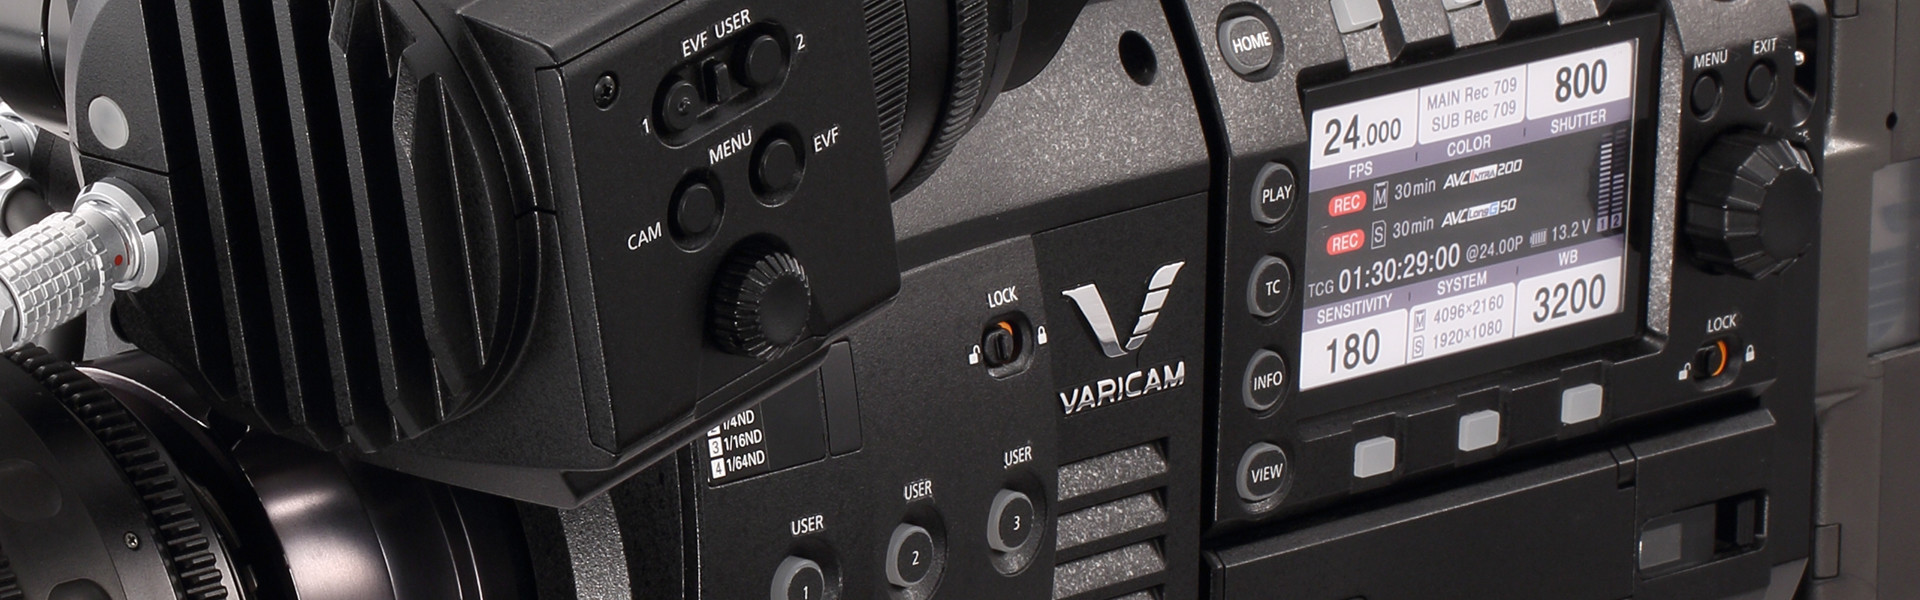 Header image for article Panasonic Releases New Firmware for VariCam 35 & HS